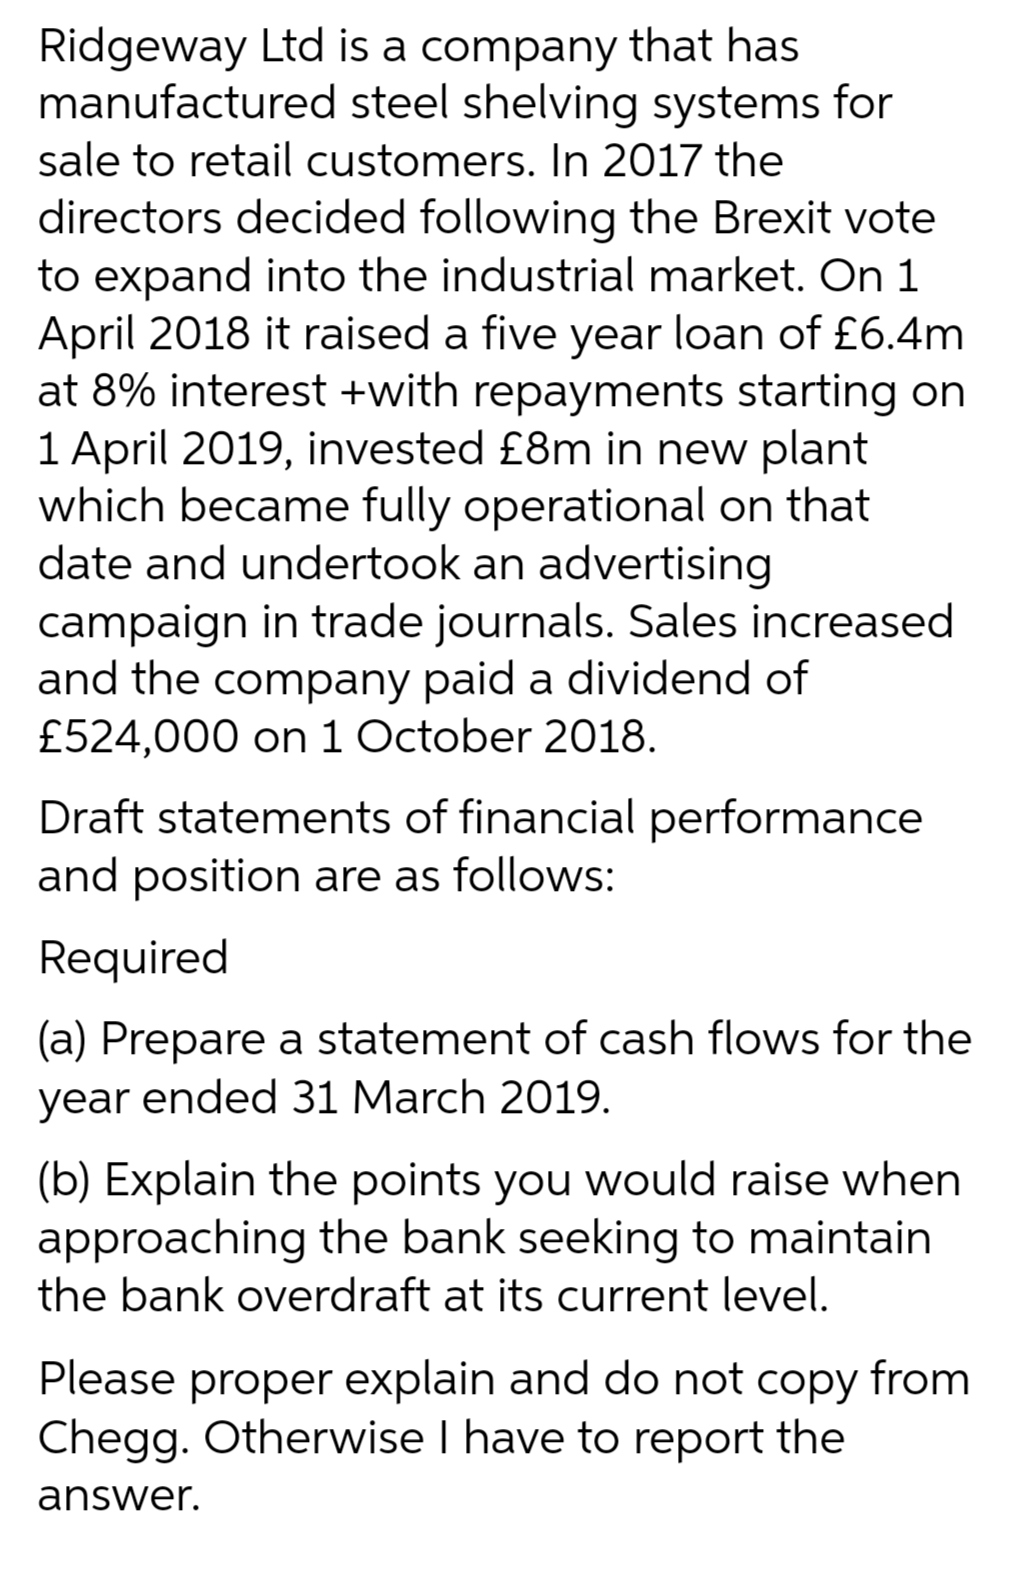 Ridgeway Ltd is a company that has
manufactured steel shelving systems for
sale to retail customers. In 2017 the
directors decided following the Brexit vote
to expand into the industrial market. On 1
April 2018 it raised a five year loan of £6.4m
at 8% interest +with repayments starting on
1 April 2019, invested £8m in new plant
which became fully operational on that
date and undertook an advertising
campaign in trade journals. Sales increased
and the company paid a dividend of
£524,000 on 1 October 2018.
Draft statements of financial performance
and position are as follows:
Required
(a) Prepare a statement of cash flows for the
year ended 31 March 2019.
(b) Explain the points you would raise when
approaching the bank seeking to maintain
the bank overdraft at its current level.
Please proper explain and do not copy from
Chegg. Otherwise I have to report the
answer.